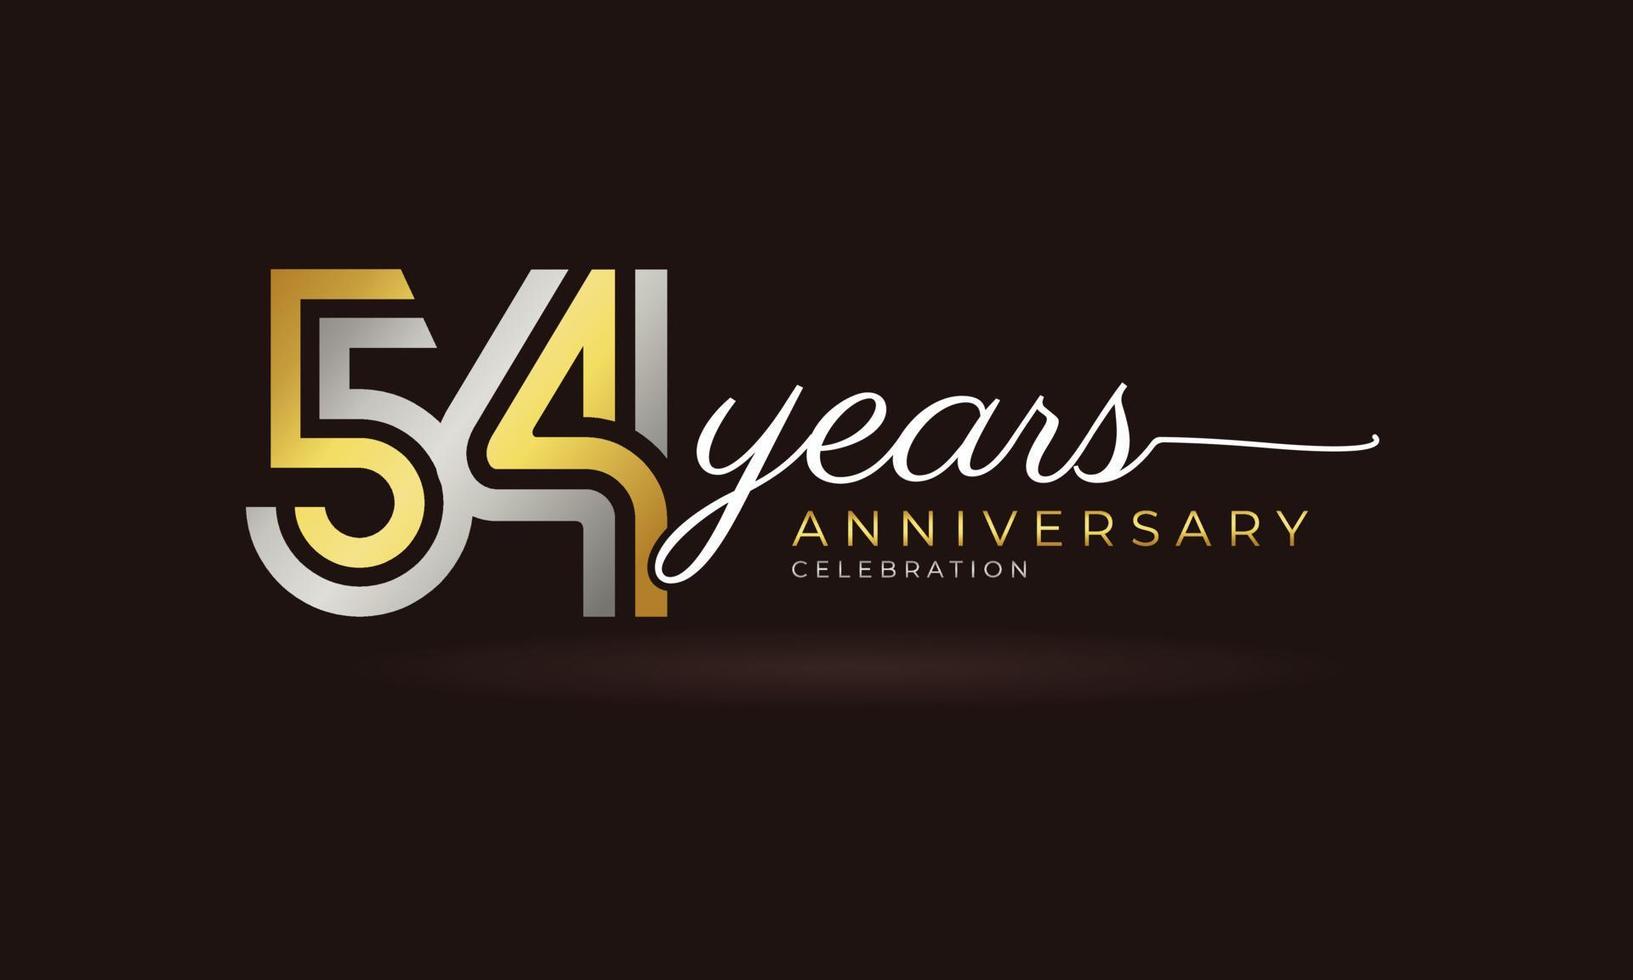 54 Year Anniversary Celebration Logotype with Linked Multiple Line Silver and Golden Color for Celebration Event, Wedding, Greeting Card, and Invitation Isolated on Dark Background vector